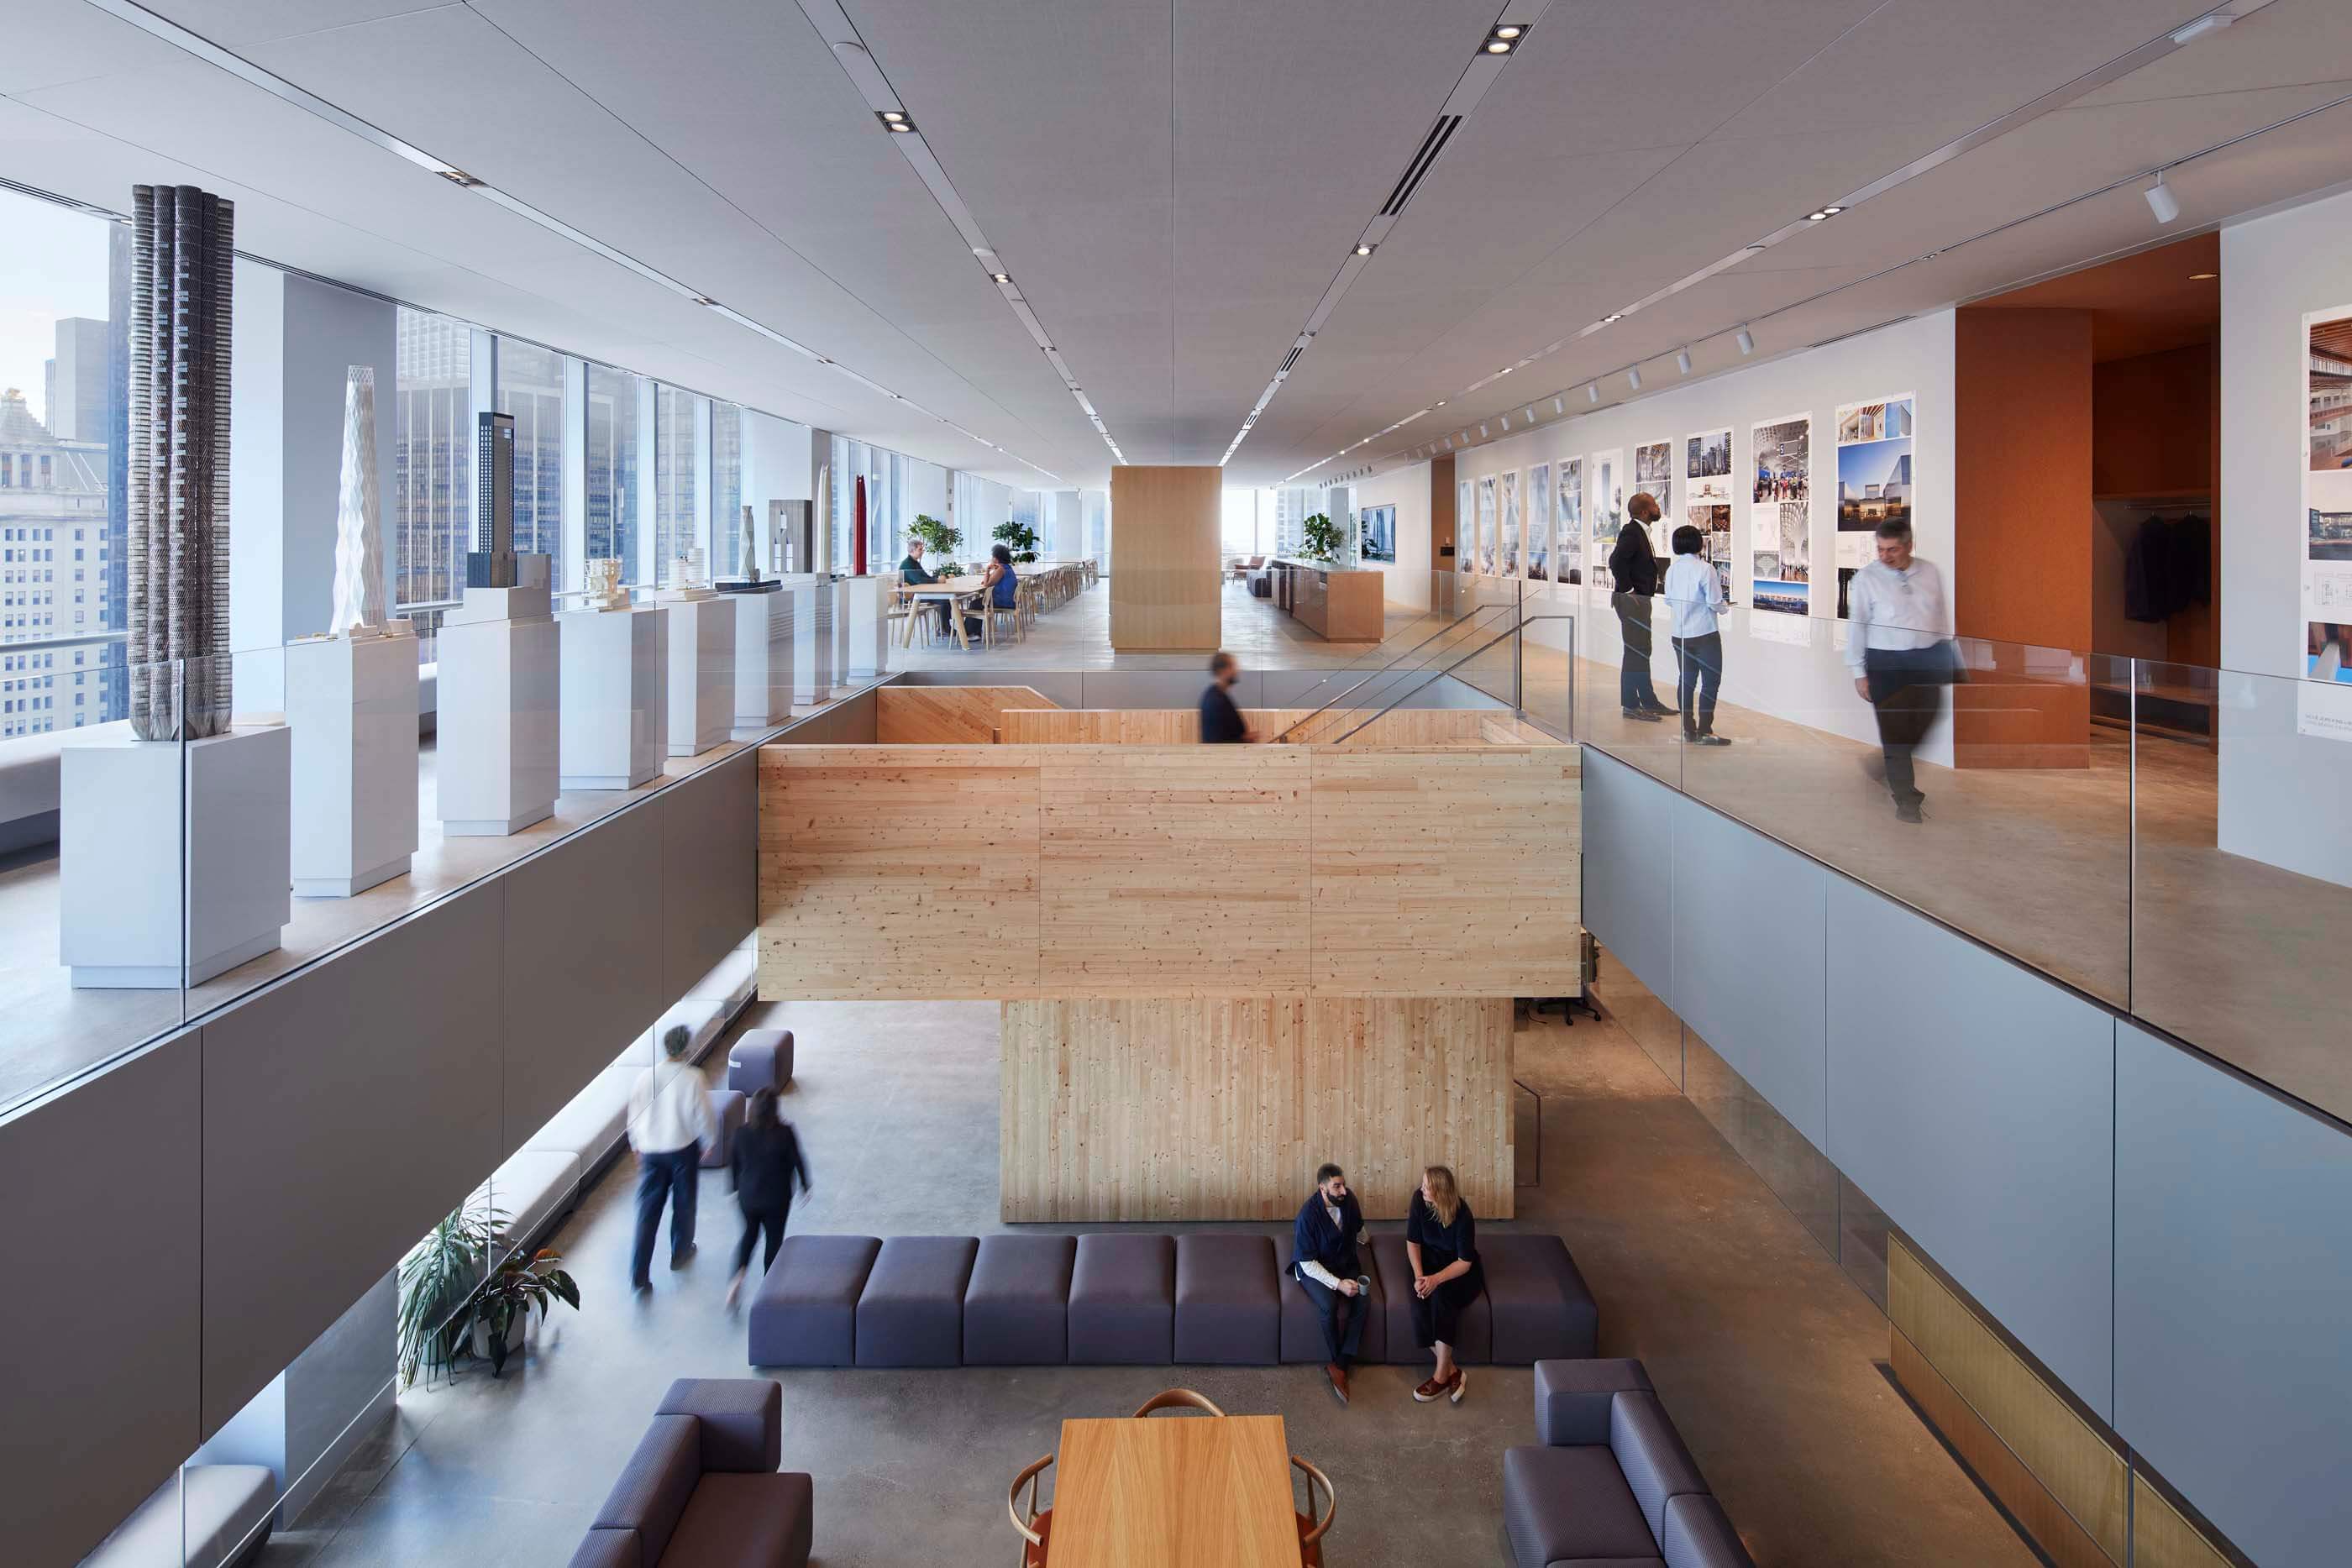 SOM's new office adopts a philosophy of “radical reduction”